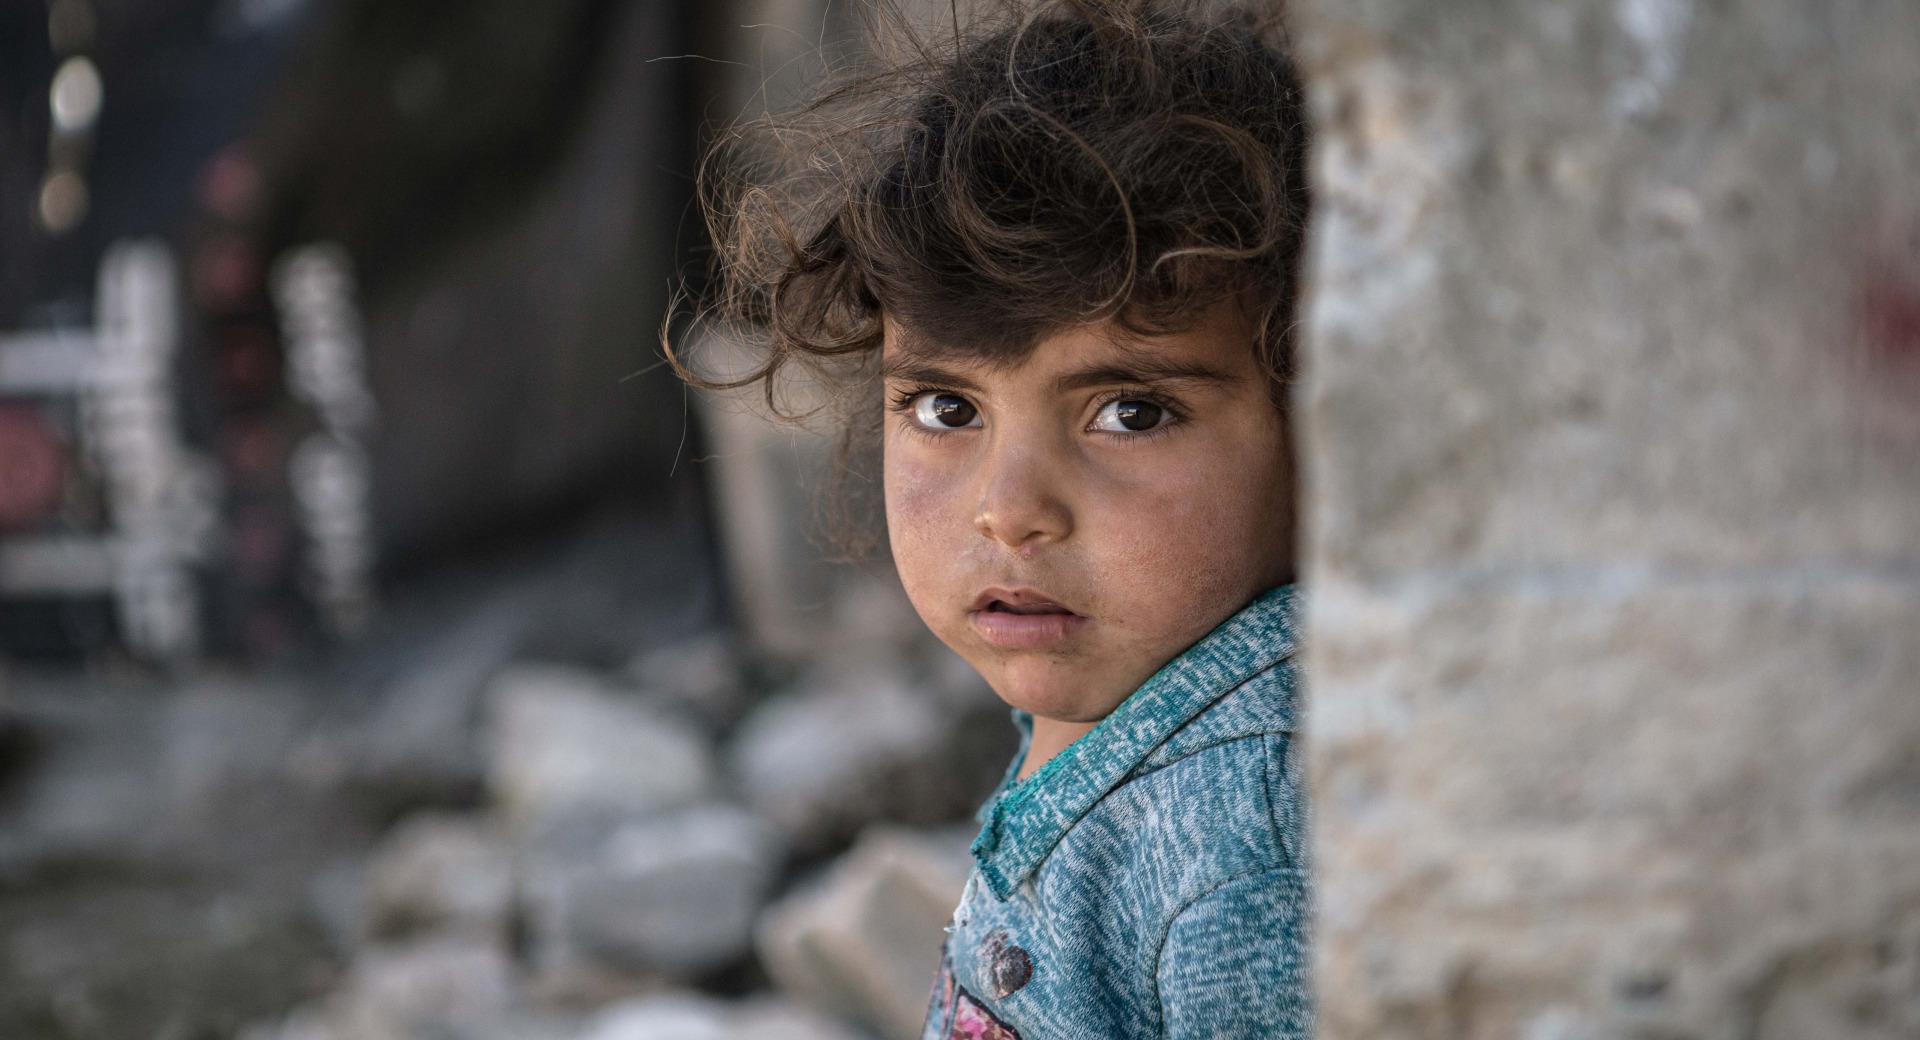 A Syrian refugee child in Lebanon.